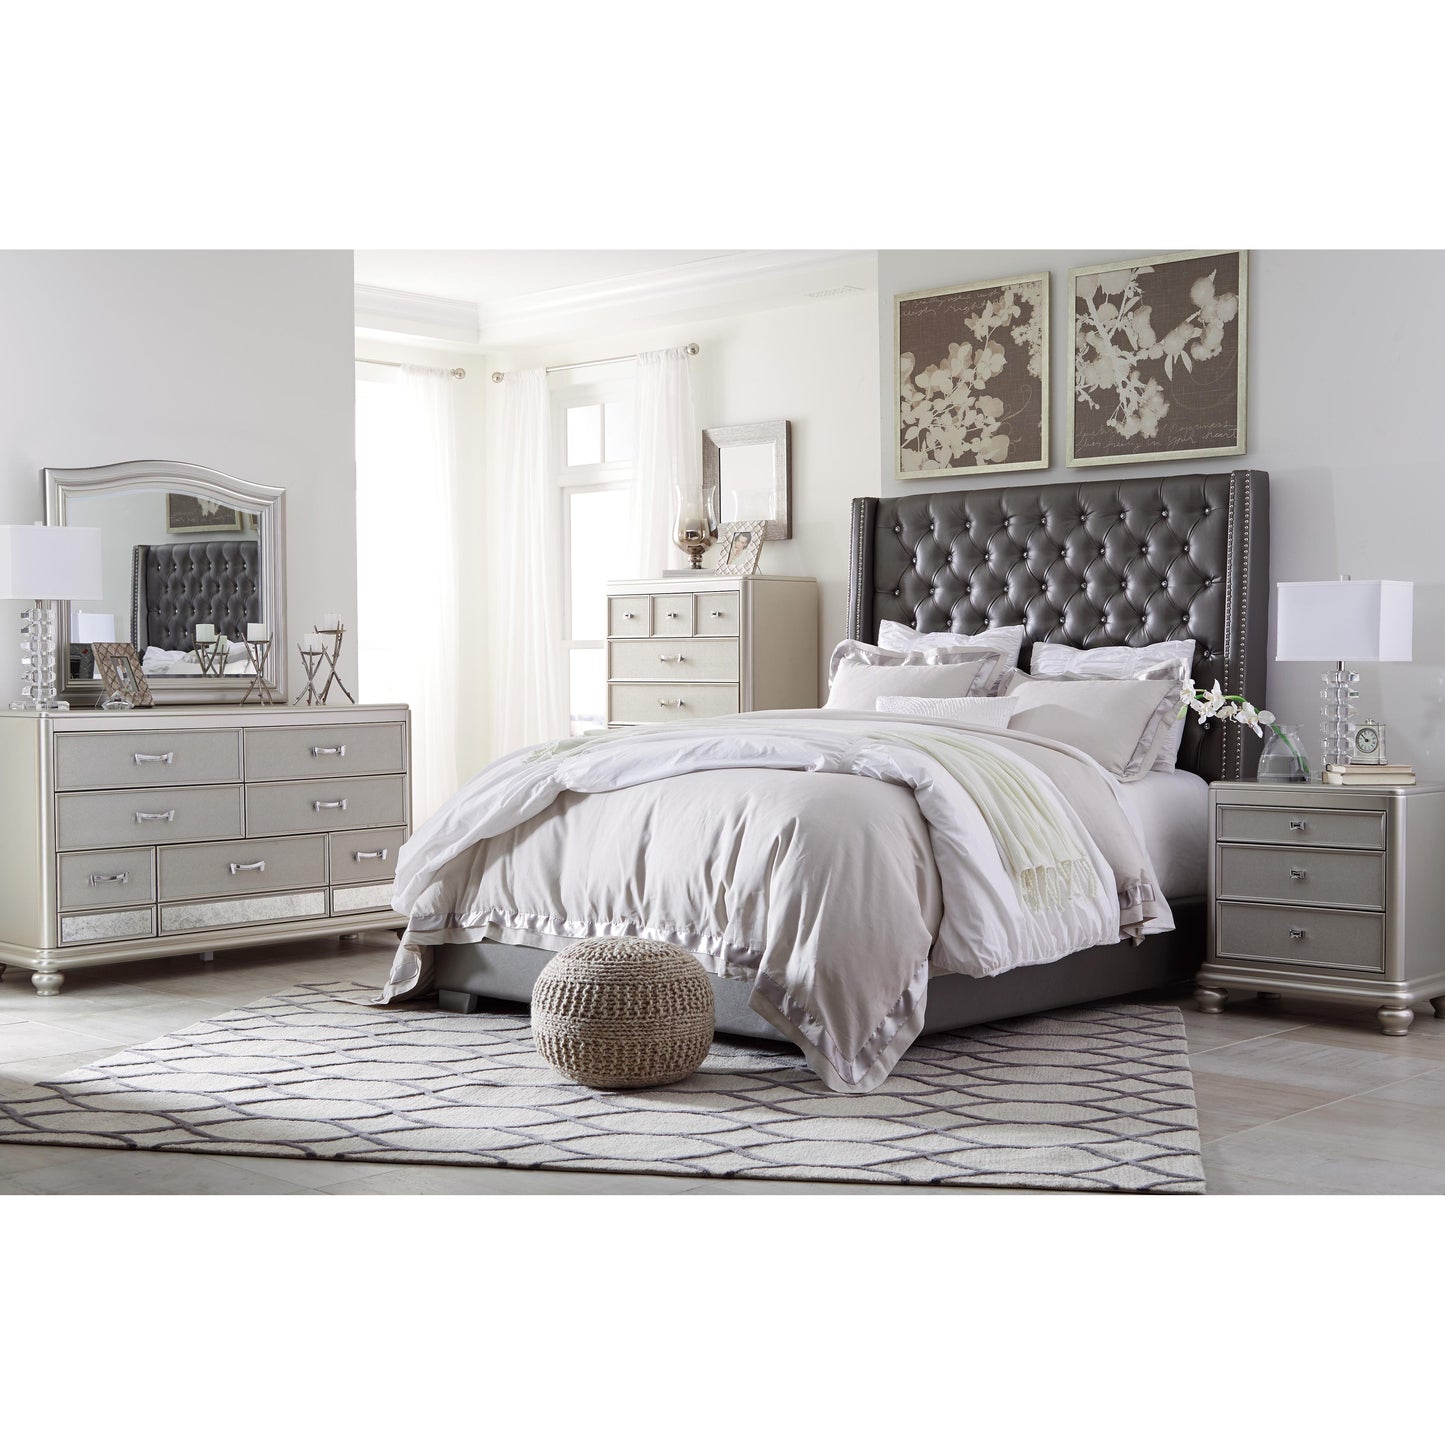 Signature Design by Ashley Coralayne B650B34 4 pc Queen Upholstered Bedroom Set IMAGE 1